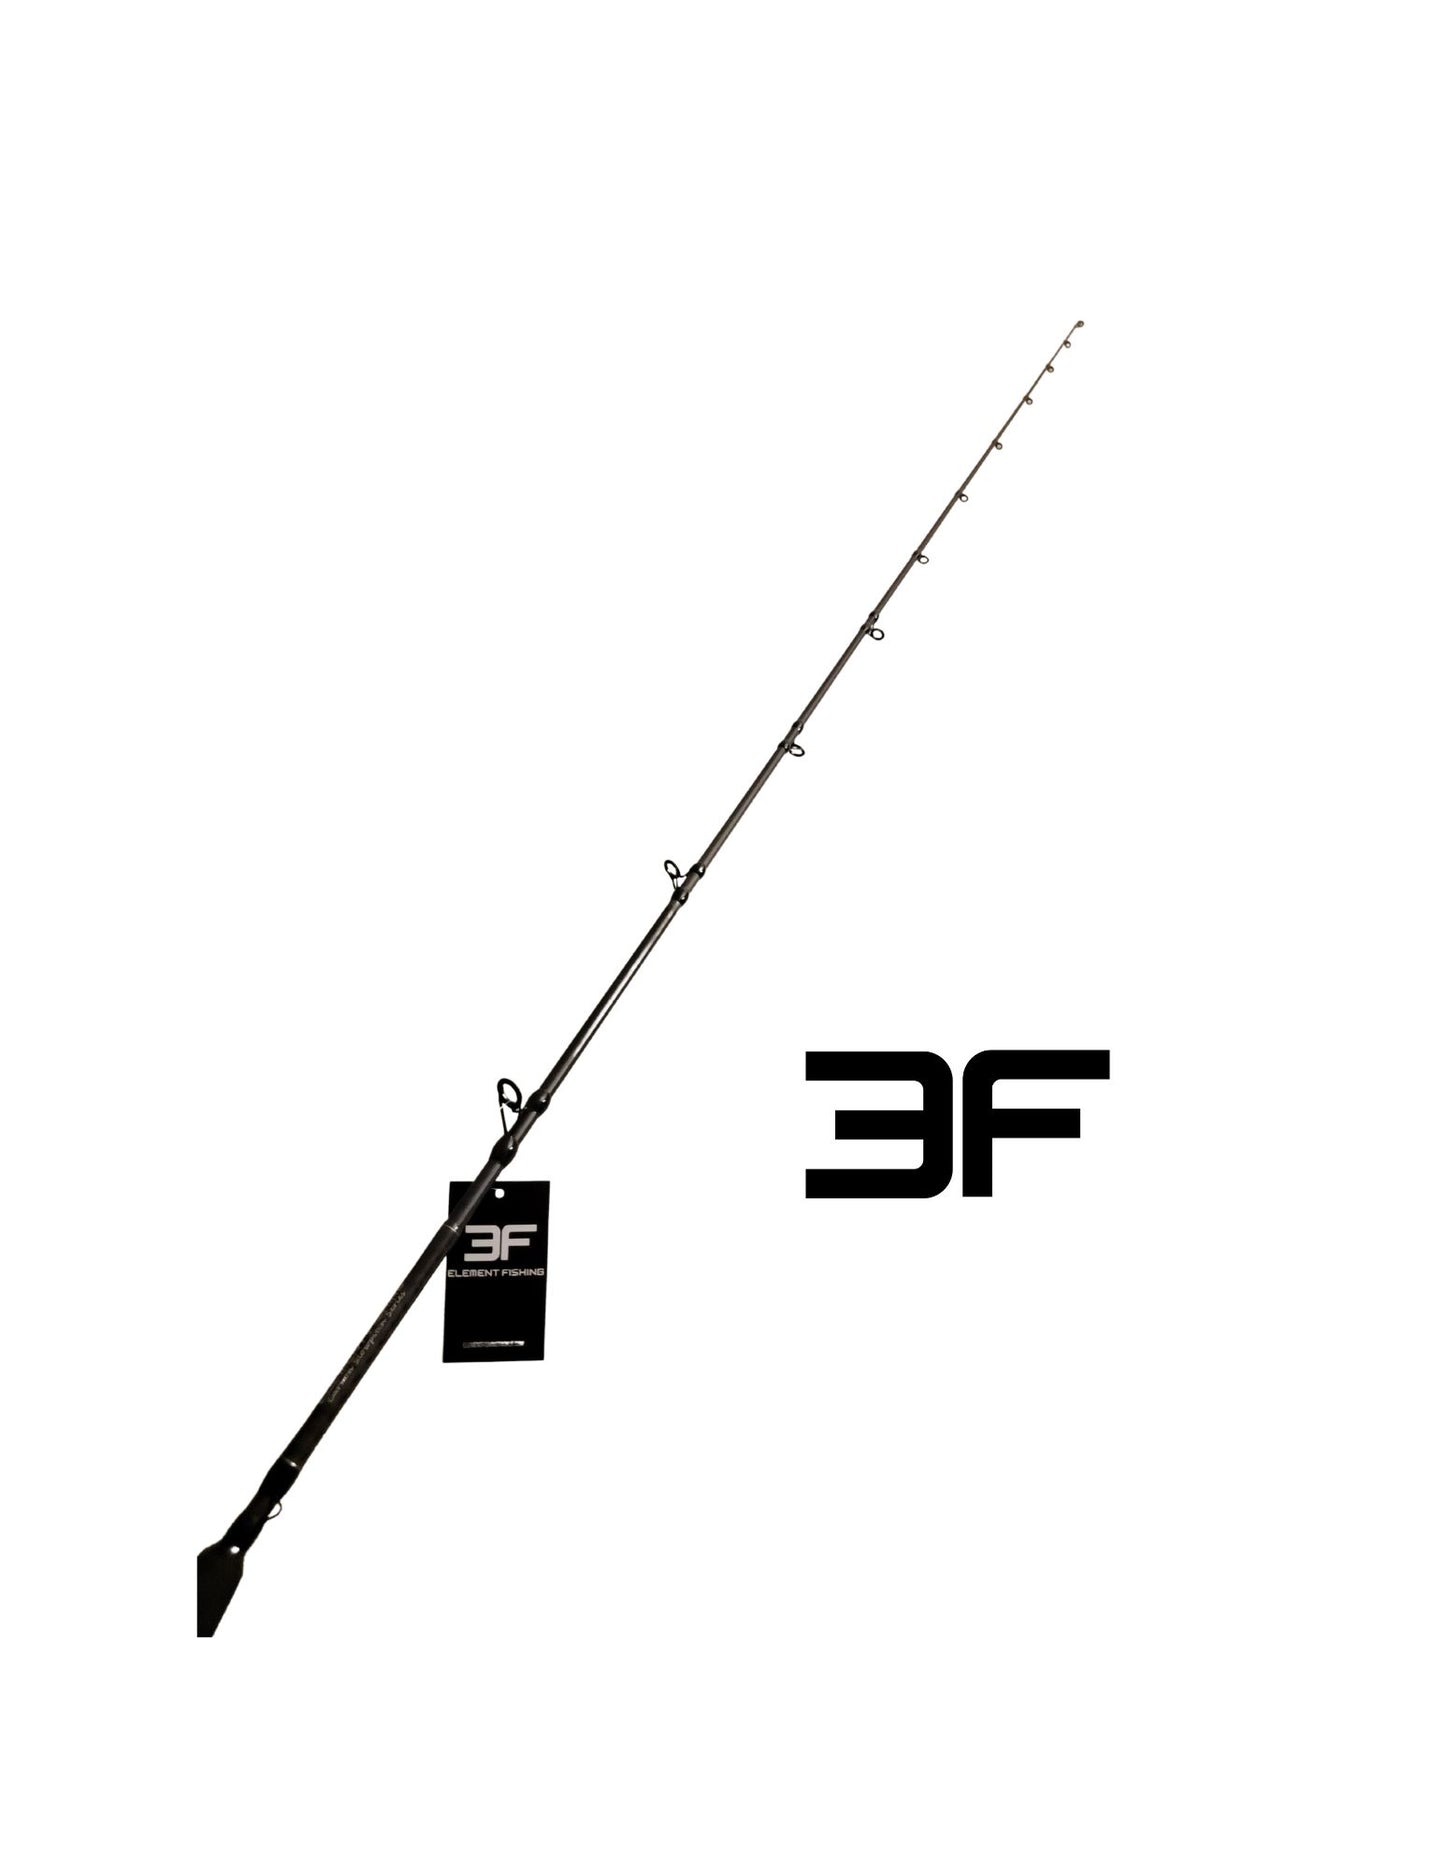 Carbon Slow Pitch Jig Series - Conventional Rods